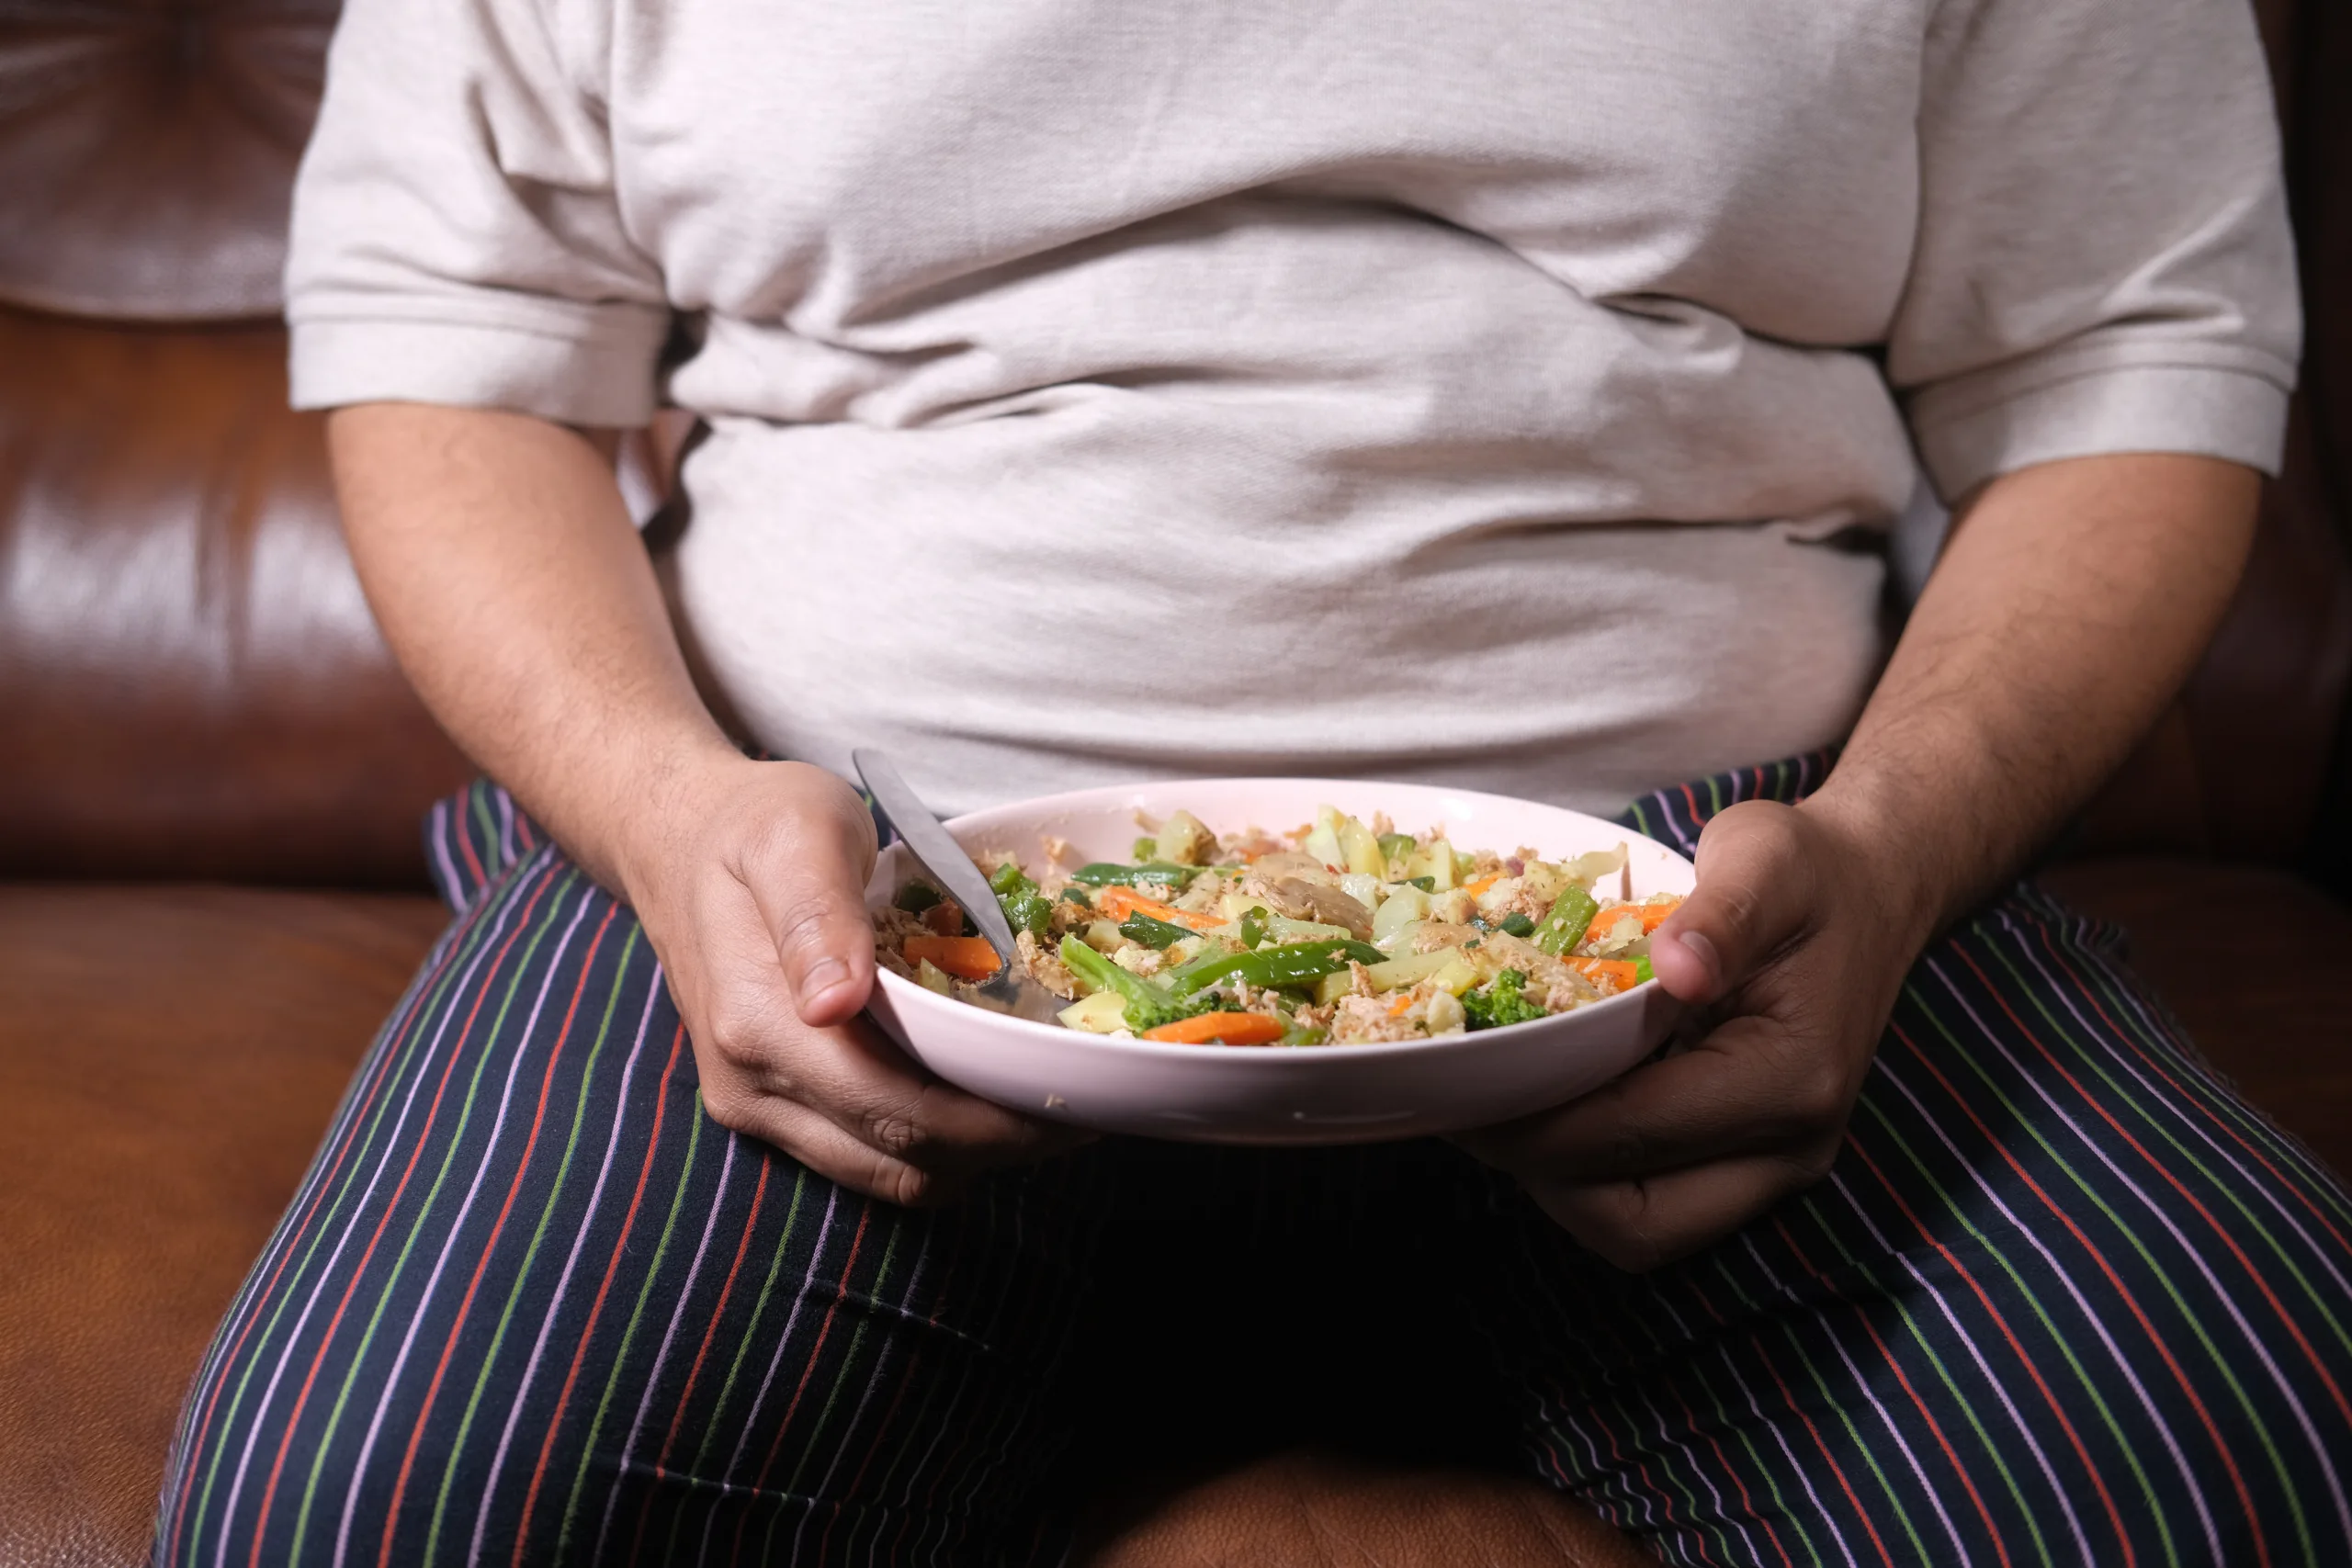 overweight person sitting holding food